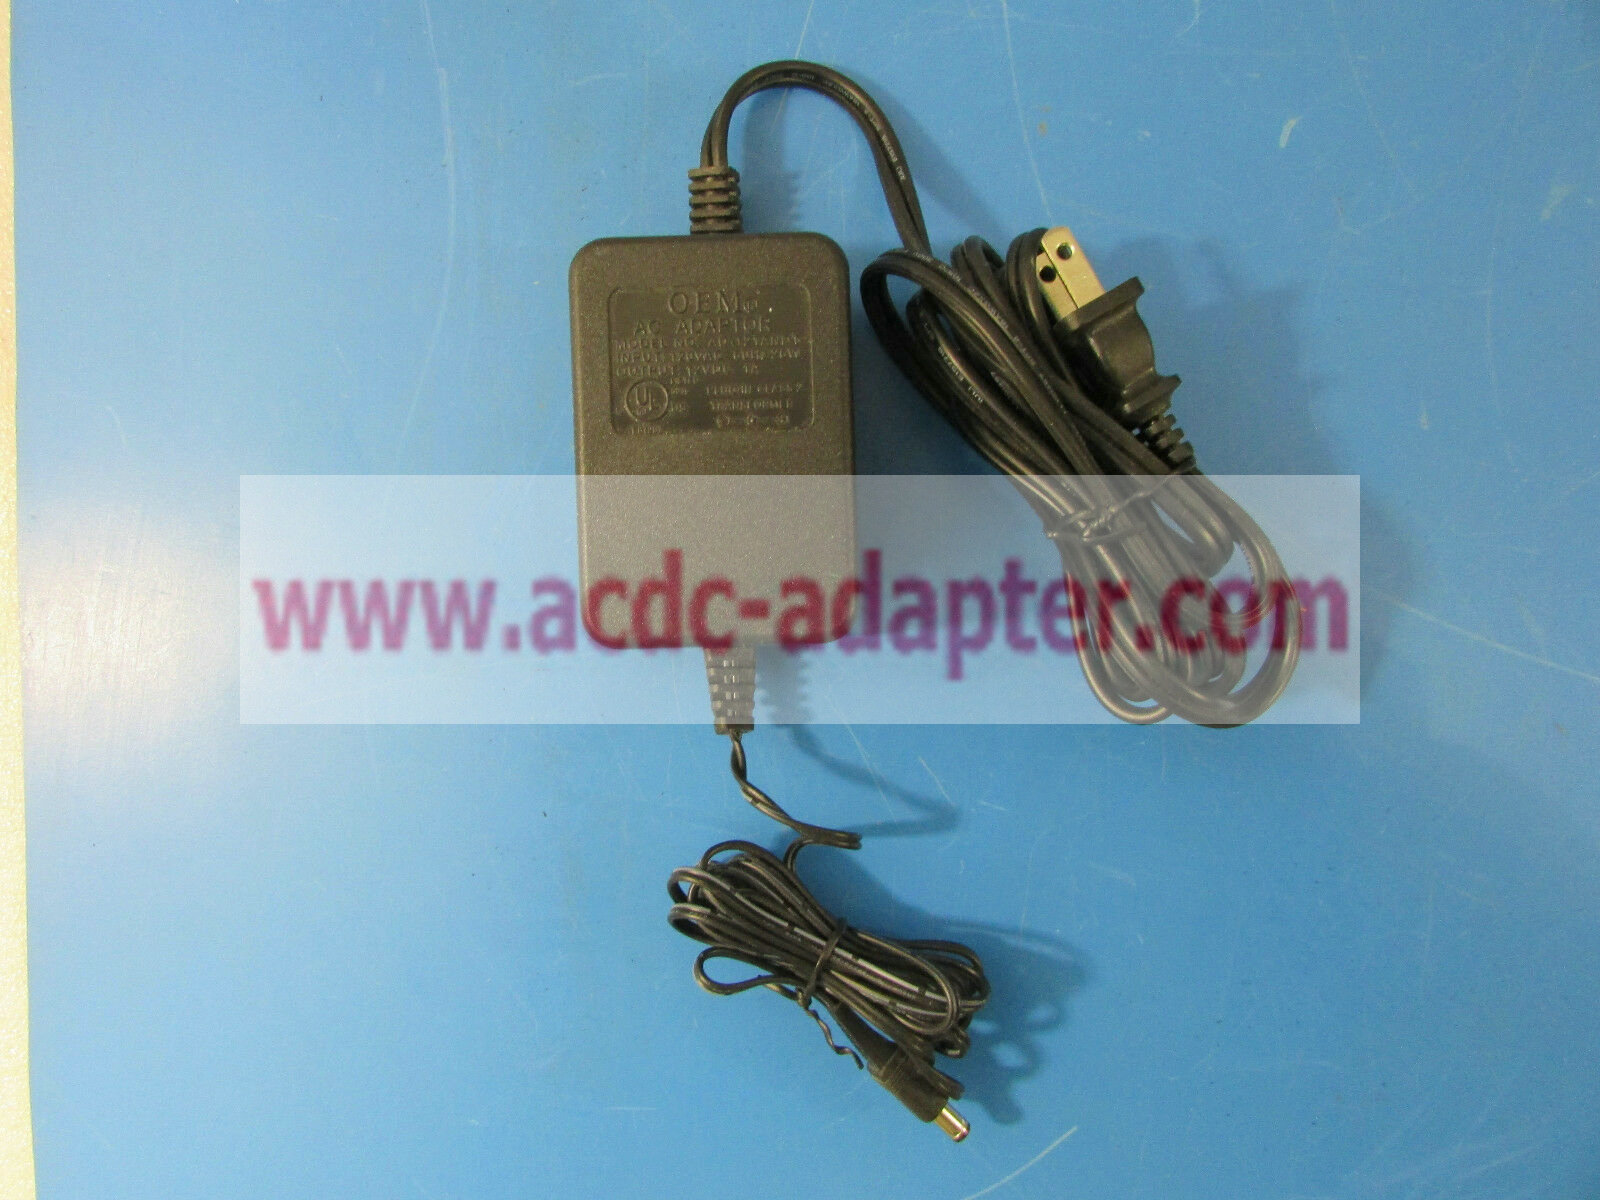 NEW 12VDC 1A AD-121ANDT AC Adapter Power Supply Plug-In Class 2 Transformer